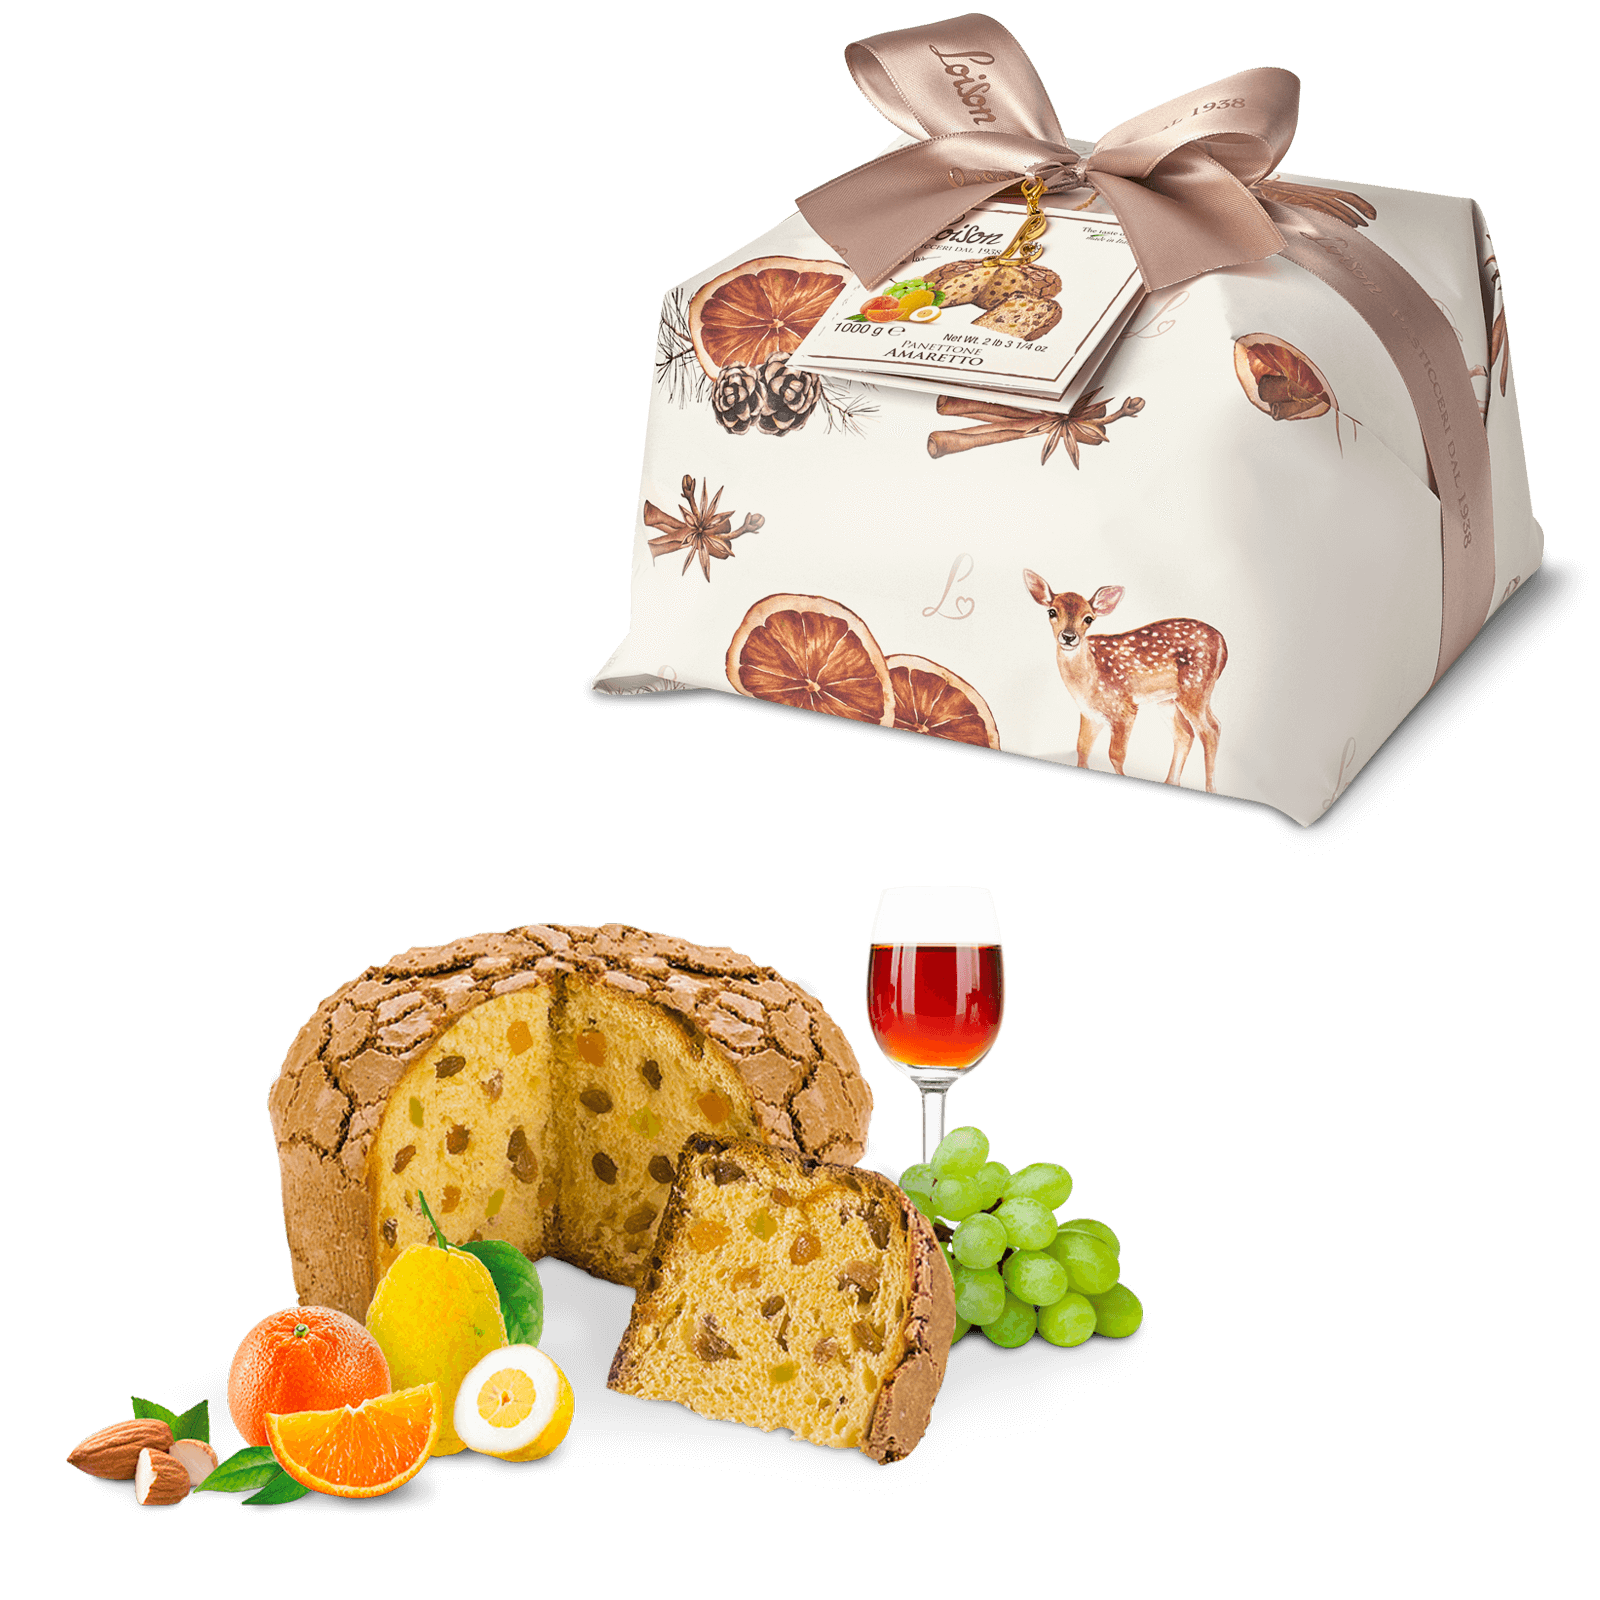 Loison Panettone with Wine Soaked Raisins